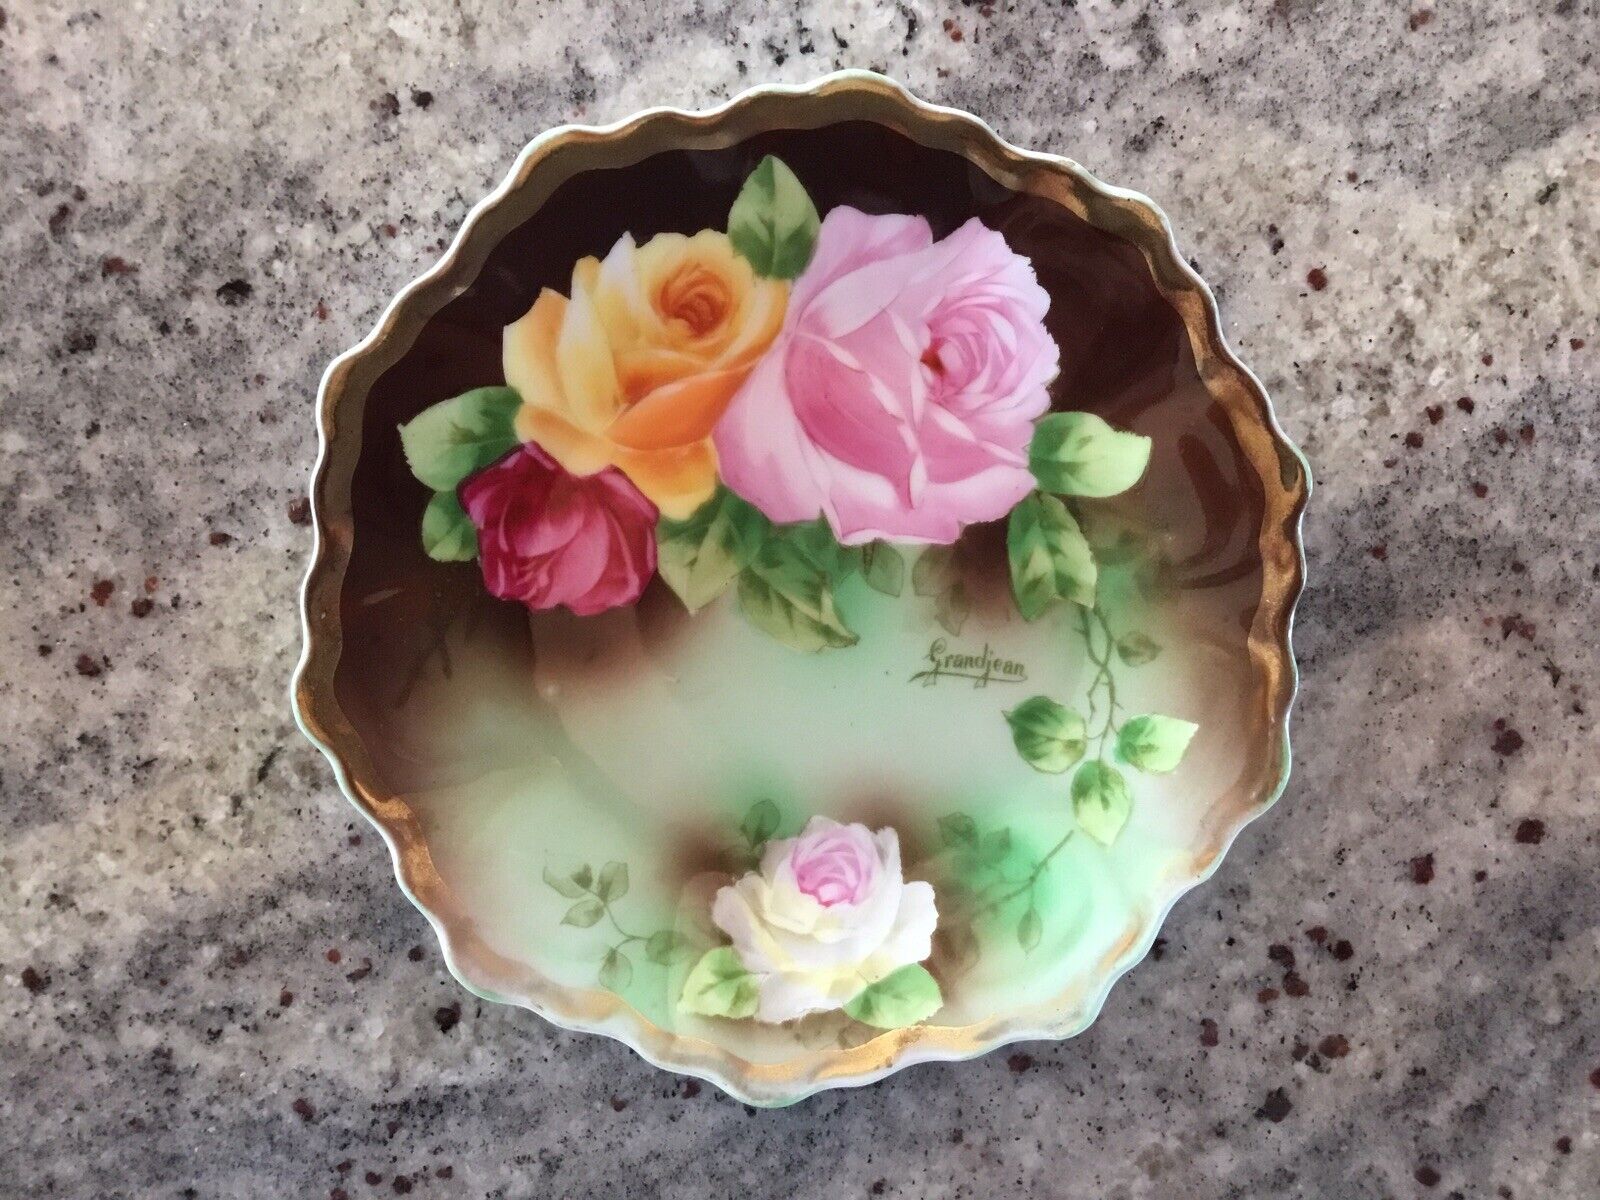 Z S & Co Royal Vienna Hand Painted Roses 6” Plate -Artist Signed Grandjean